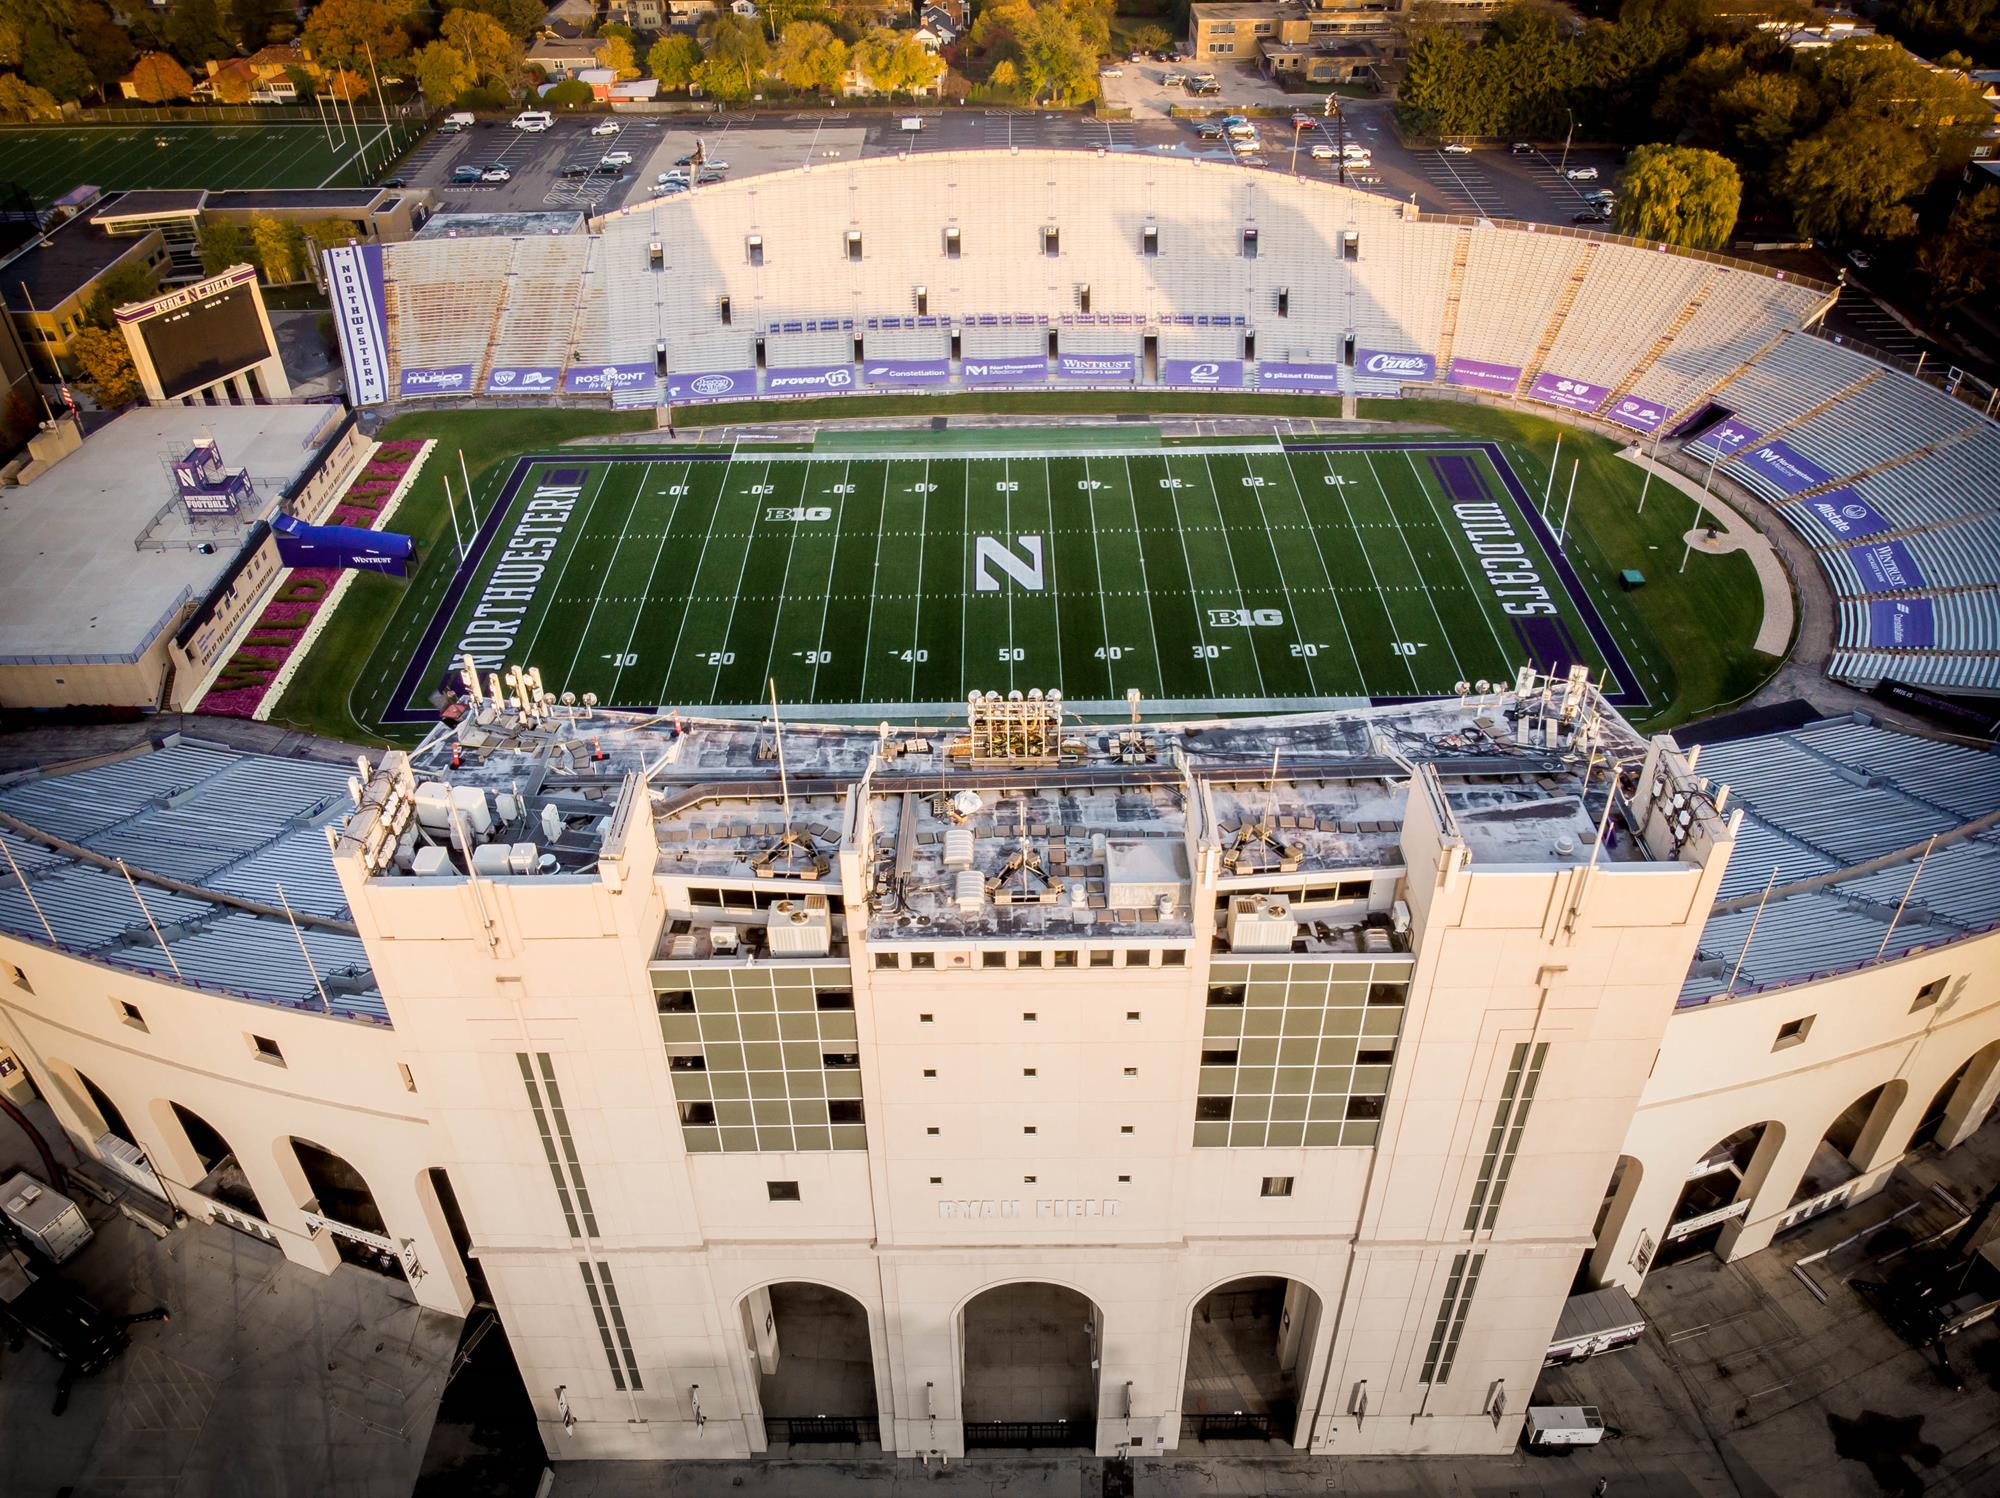   
																Evanston/North Shore NAACP to host a ‘Rebuild Ryan Field’ community forum this Monday 
															 